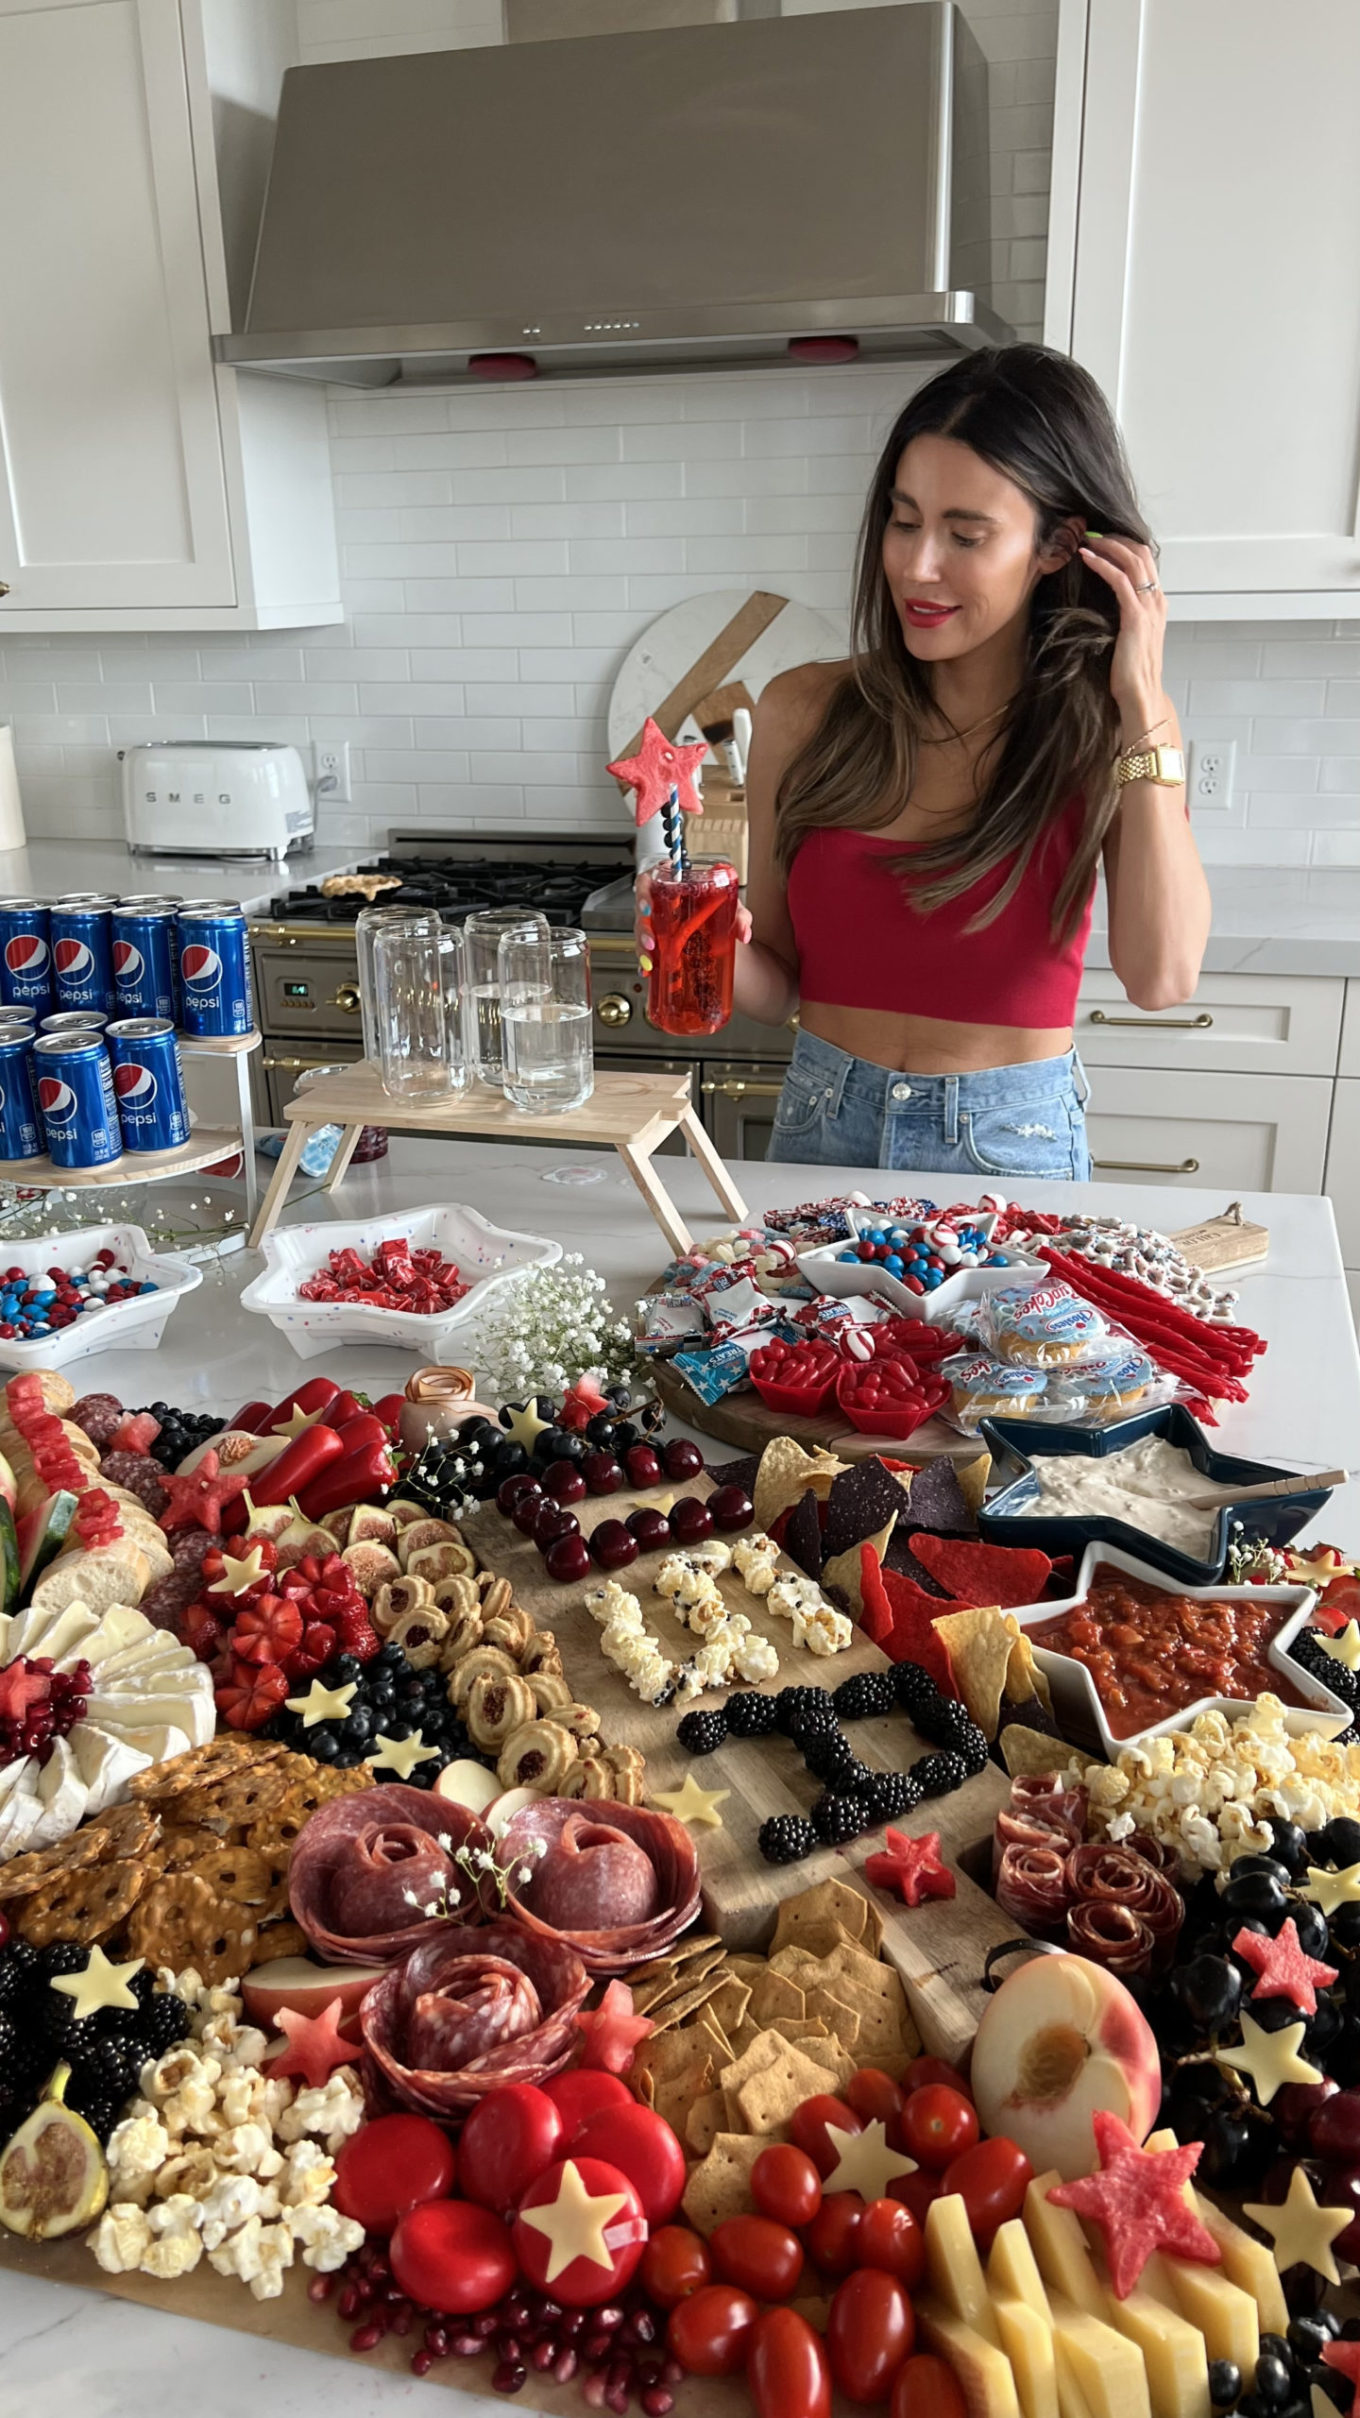 Fourth of July, 5 party hacks, party, festive fruit, color coordinated fruit, charcuterie spread, party spread, charcuterie board, Sams club, 4th of July, 4th of July charcuterie board